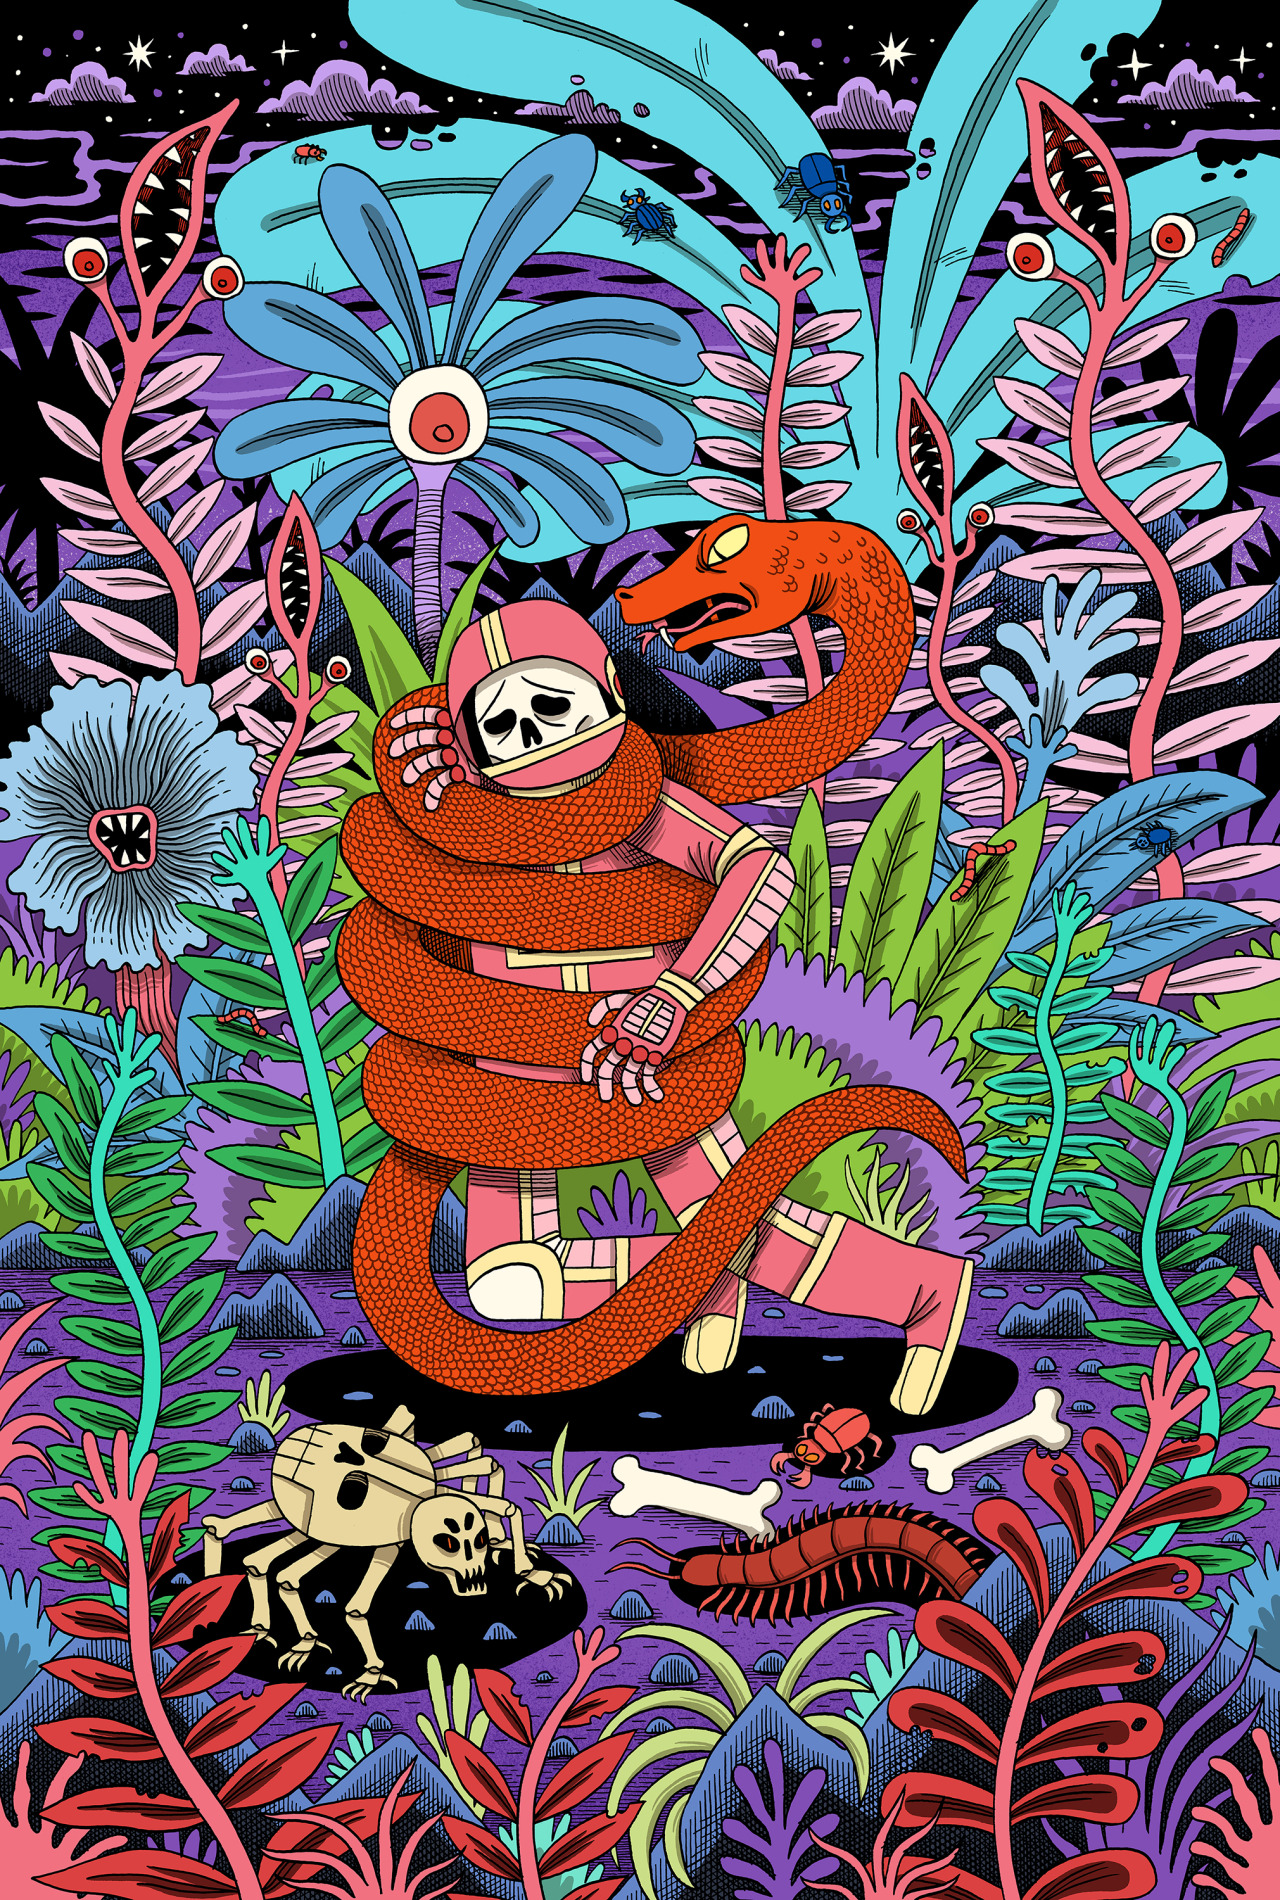 jackteagle: Snake Attack!Originally I was struggling with how to colour this image, since the ink drawing is now over a year old. The colours were inspired by a recent trip to the Eden project at night. Sometimes all it takes is a trip or a walk, and